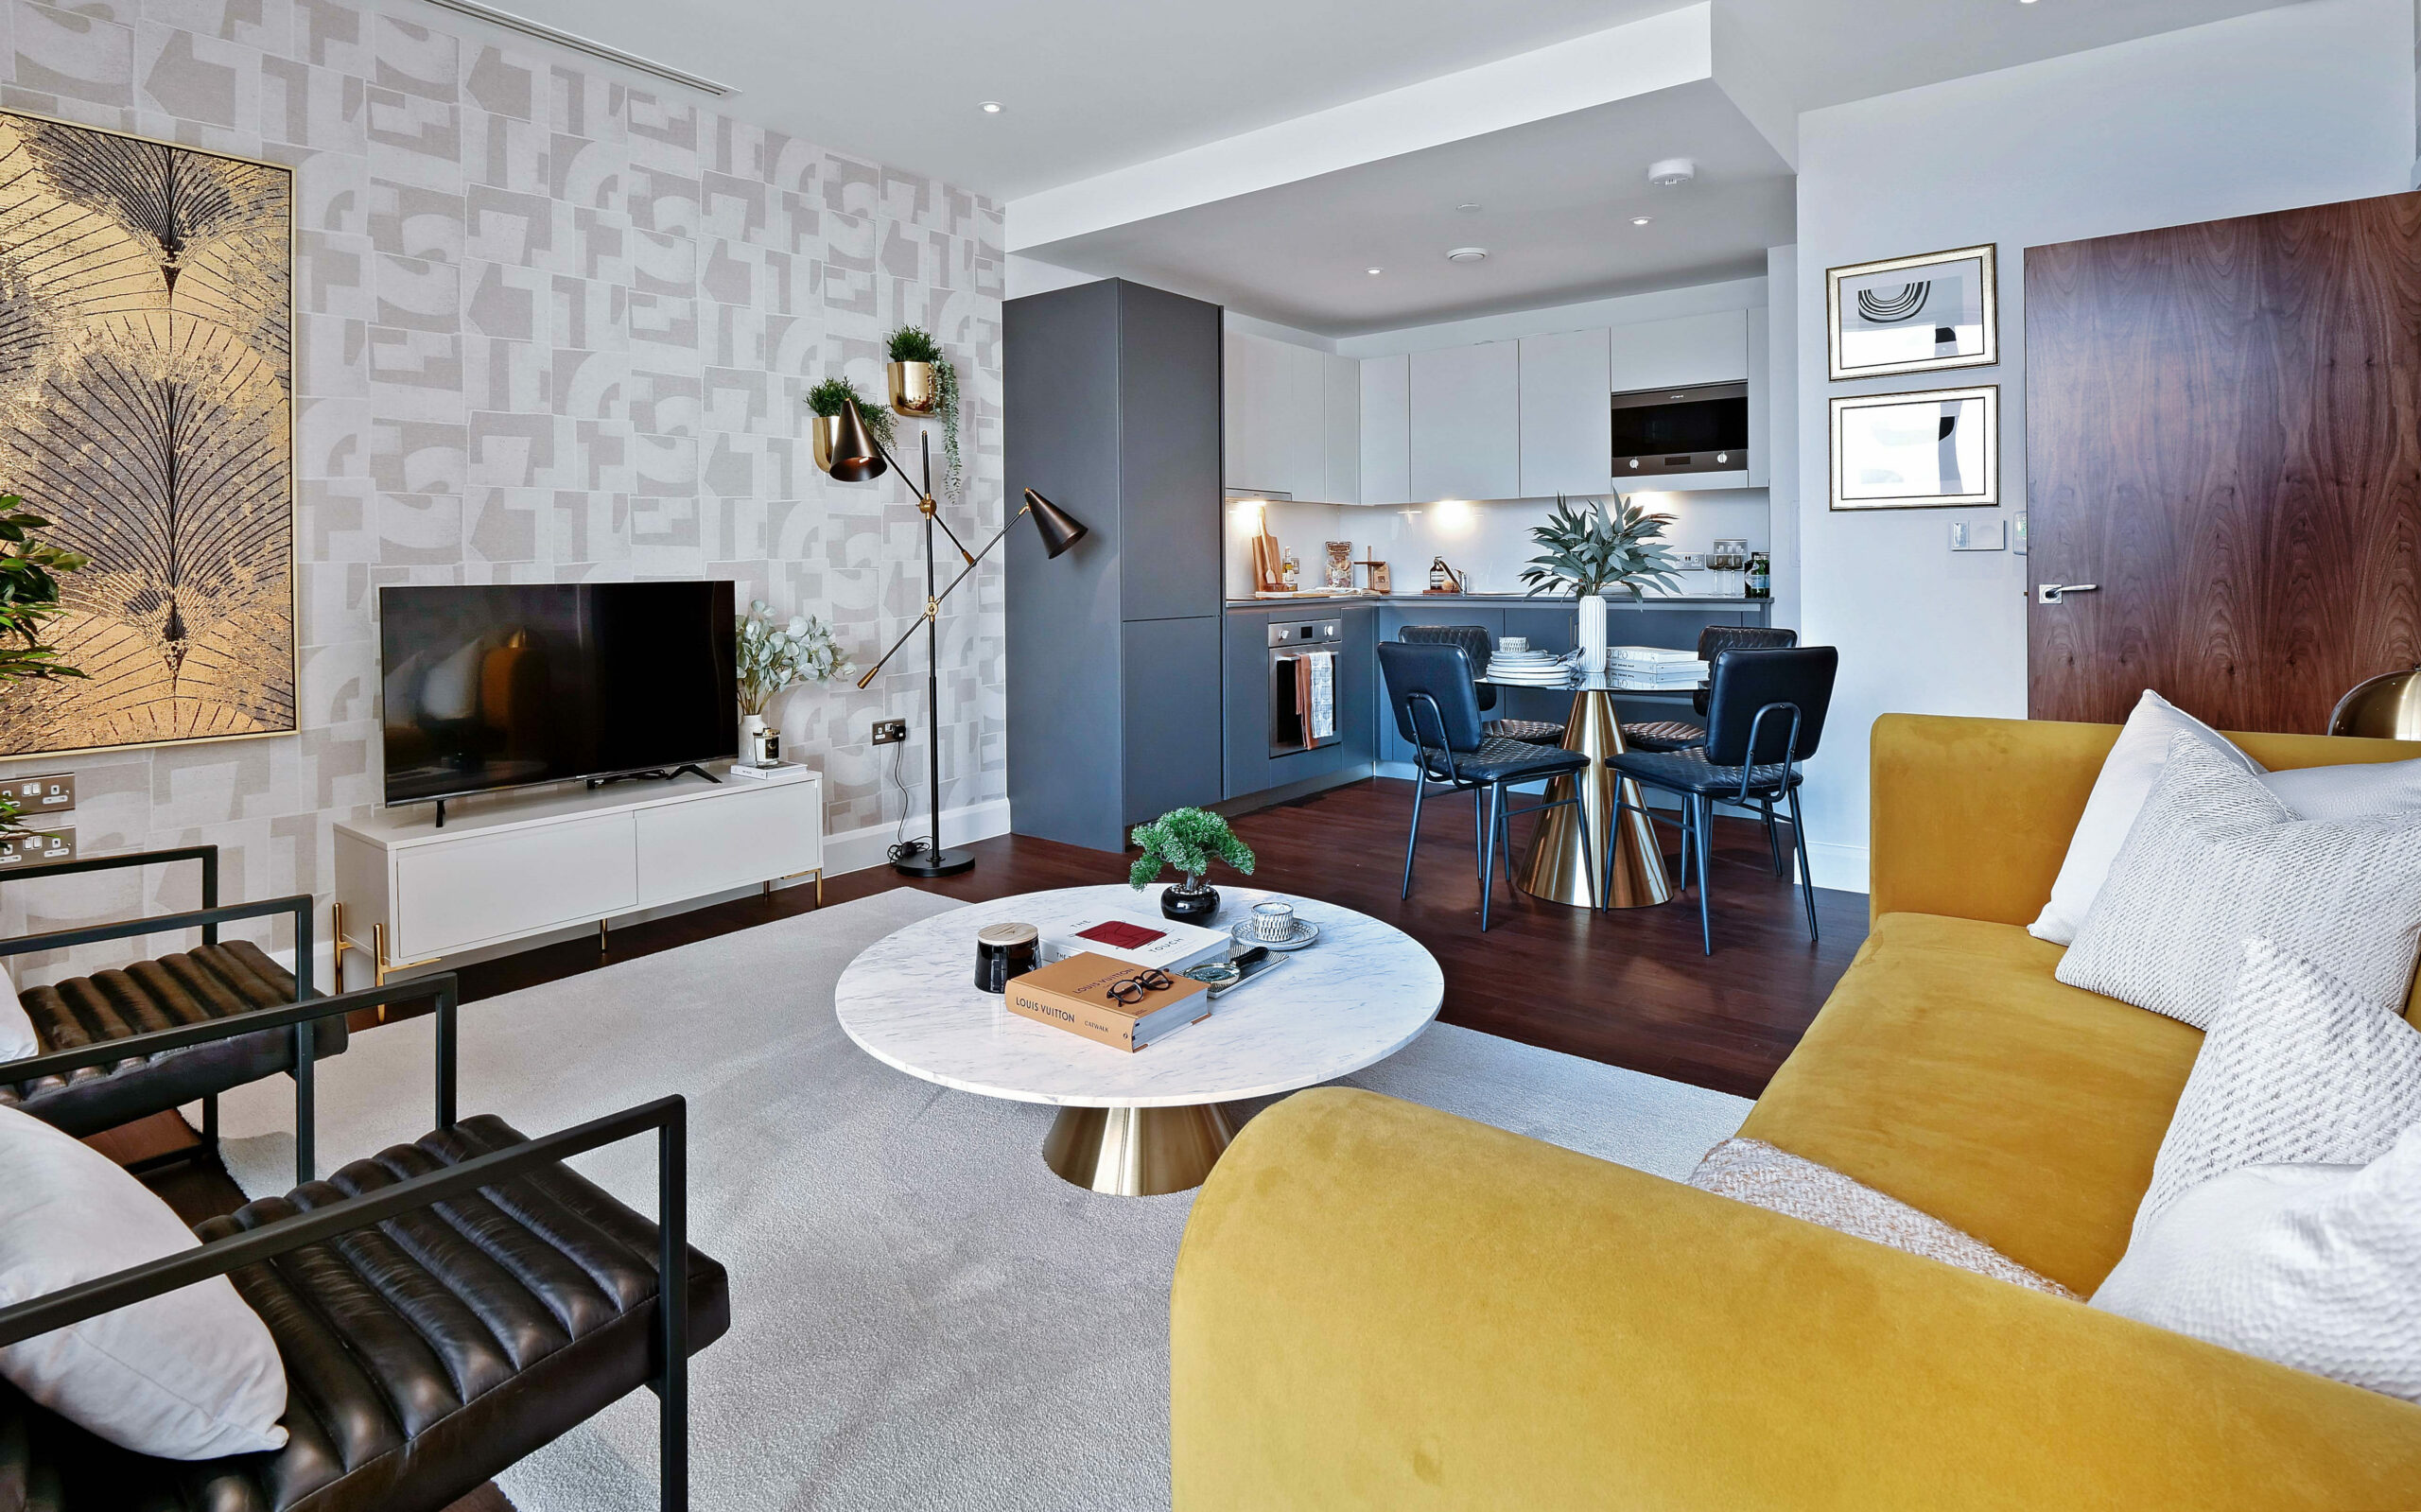 Internal show home photography at Notting Hill Genesis' Dockside - Shared Ownership homes available on Share to Buy